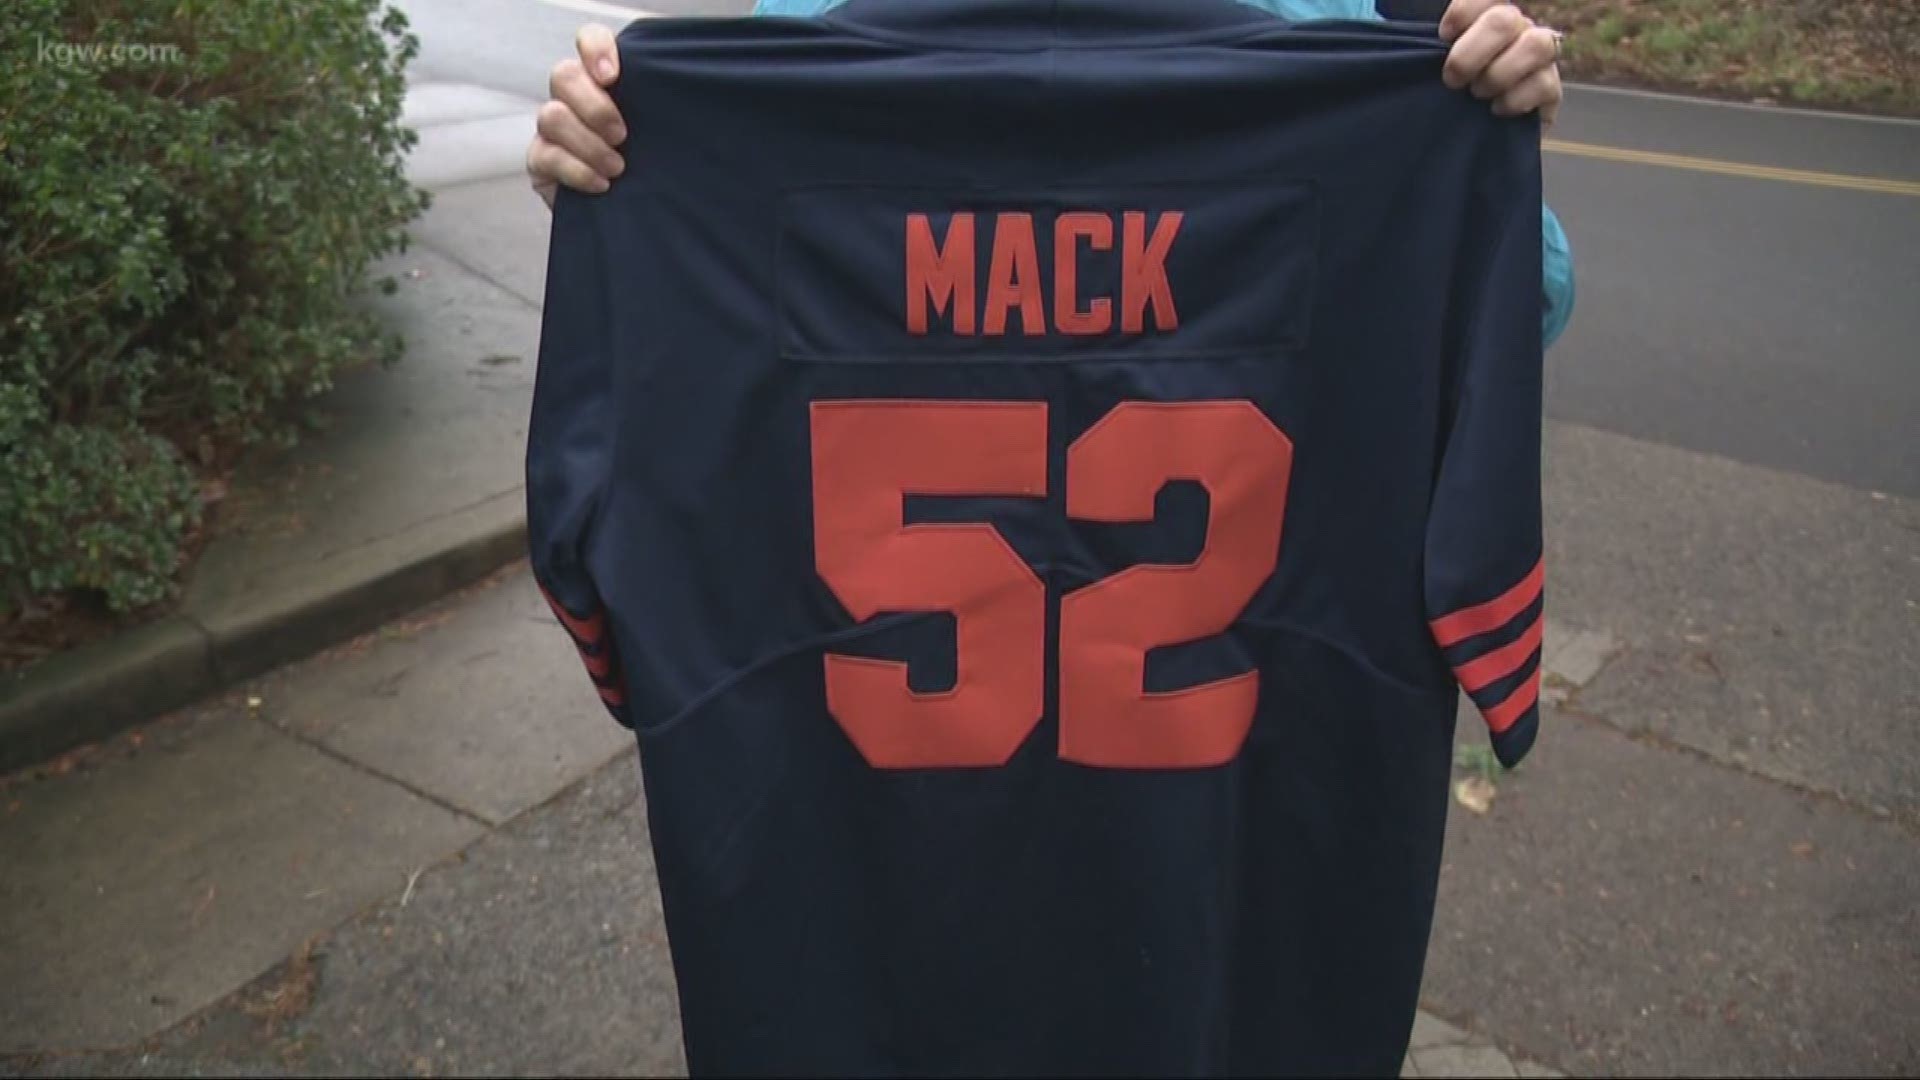 An Oregon business is accused of selling fake NFL apparel.